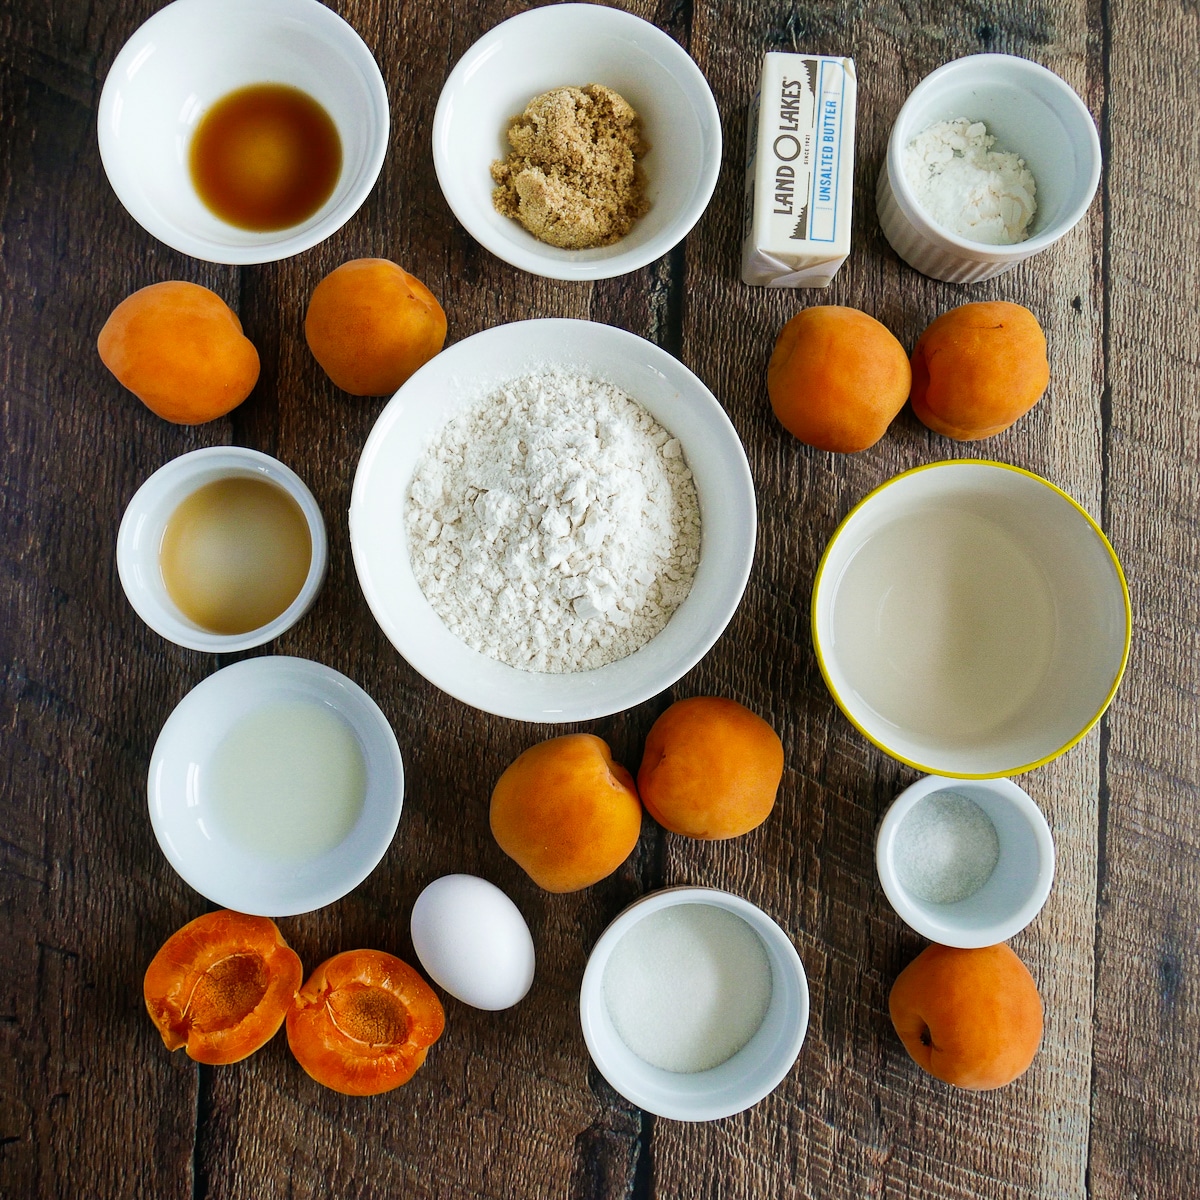 Galette recipe ingredients arranged on a table.